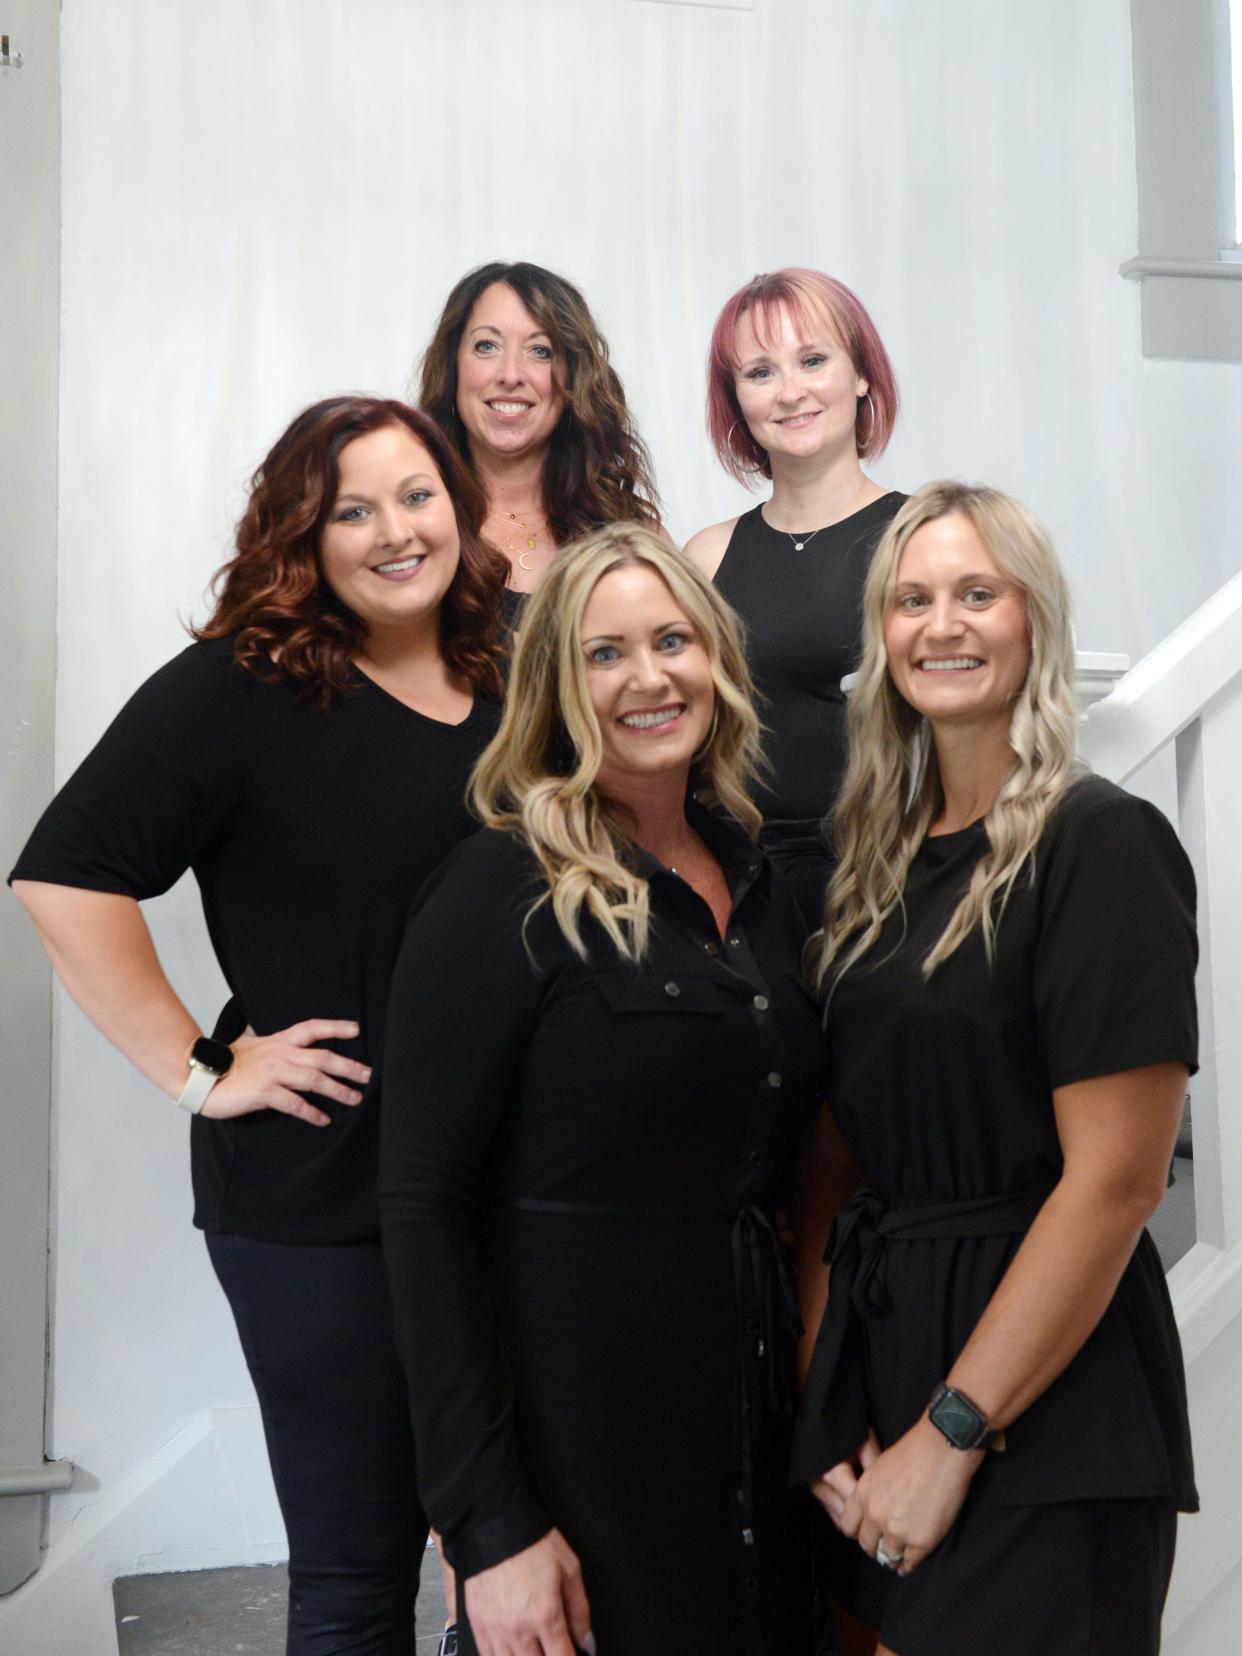 Owner Teisha Lewellen, middle, joined forces with Heather Jadwin, left, Nikole Daniels, Bethany Shawger and Nicole Armstrong to form The Design Studio Salon and Spa on Adair Avenue in Zanesville. It offers a full-service salon and spa in a private atmosphere in a historic building that was fully renovated and preserved.